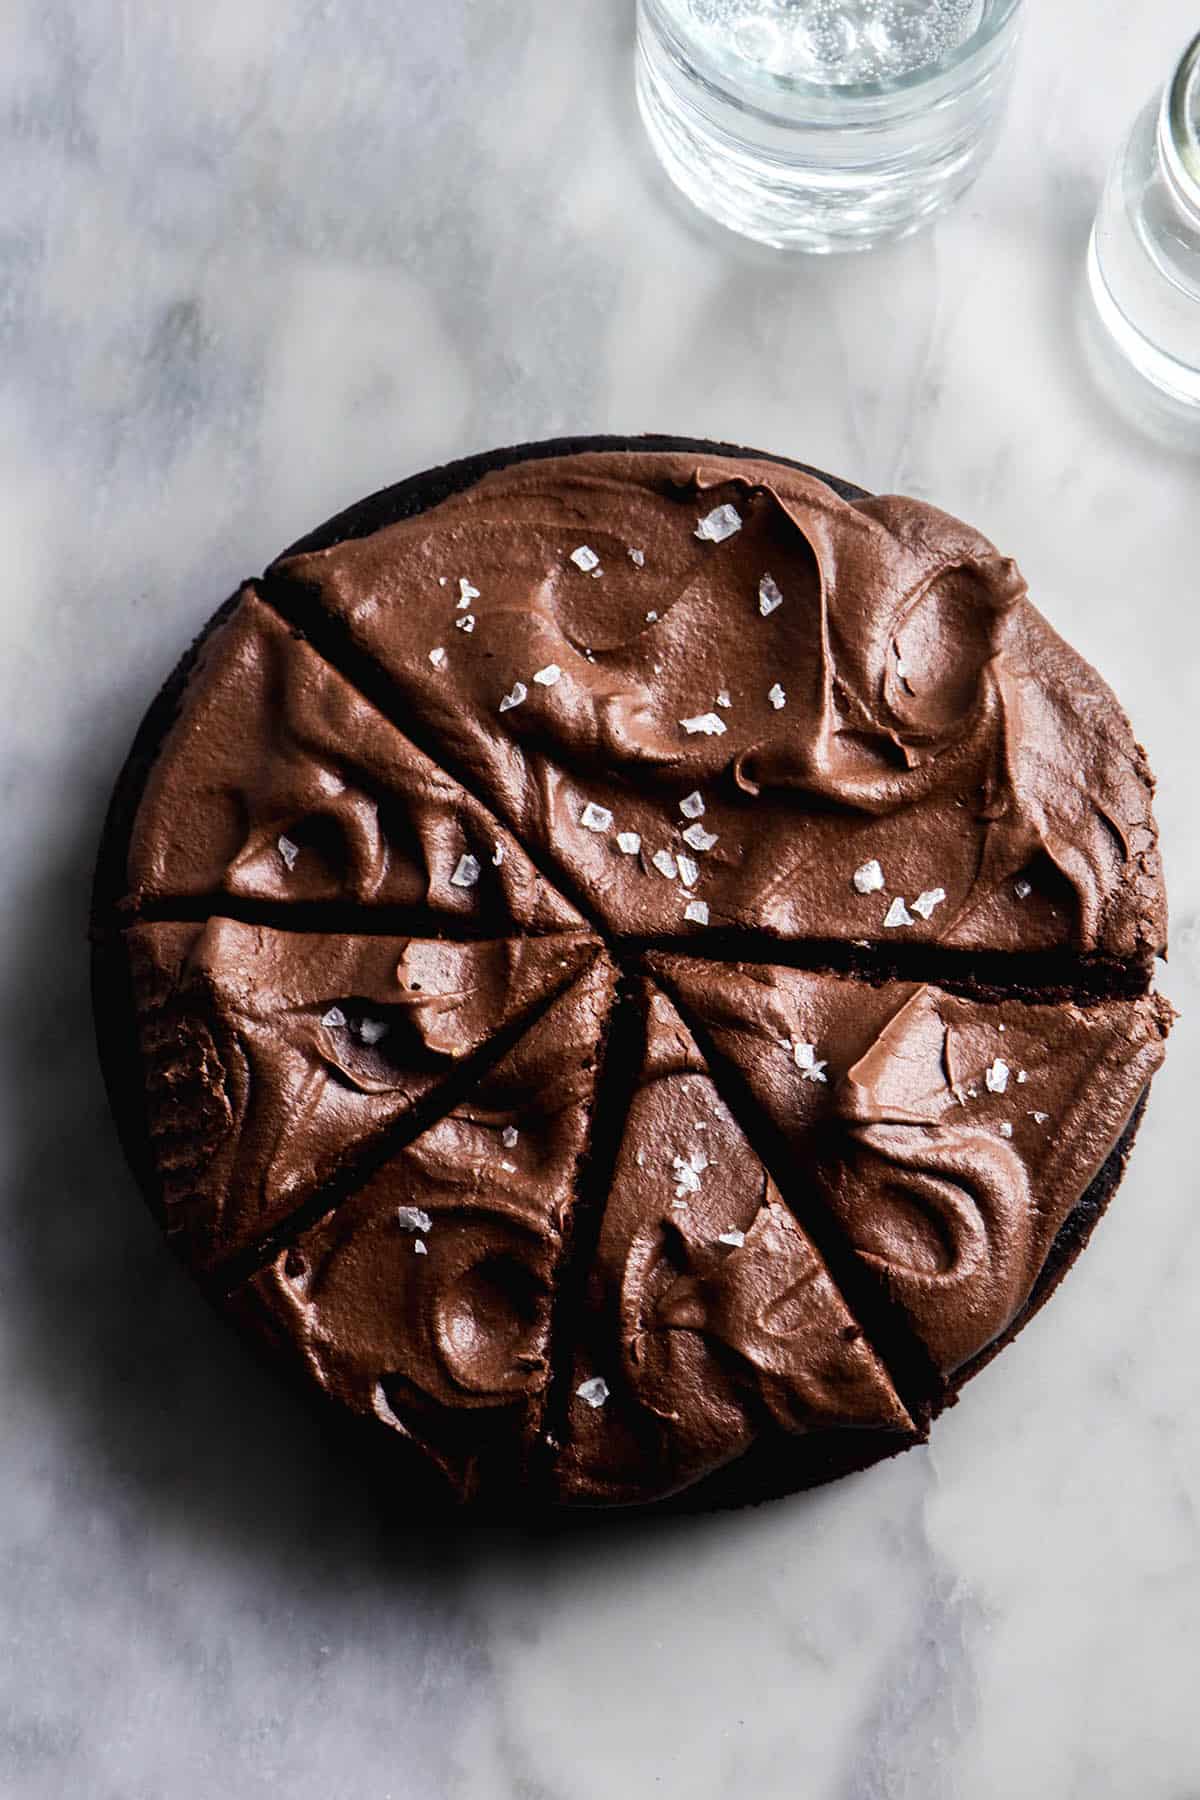 An aerial image of a gluten free vegan chocolate cake on a white marble table. The cake has been topped with vegan chocolate buttercream and a sprinkle of sea salt flakes and is cut into slices.